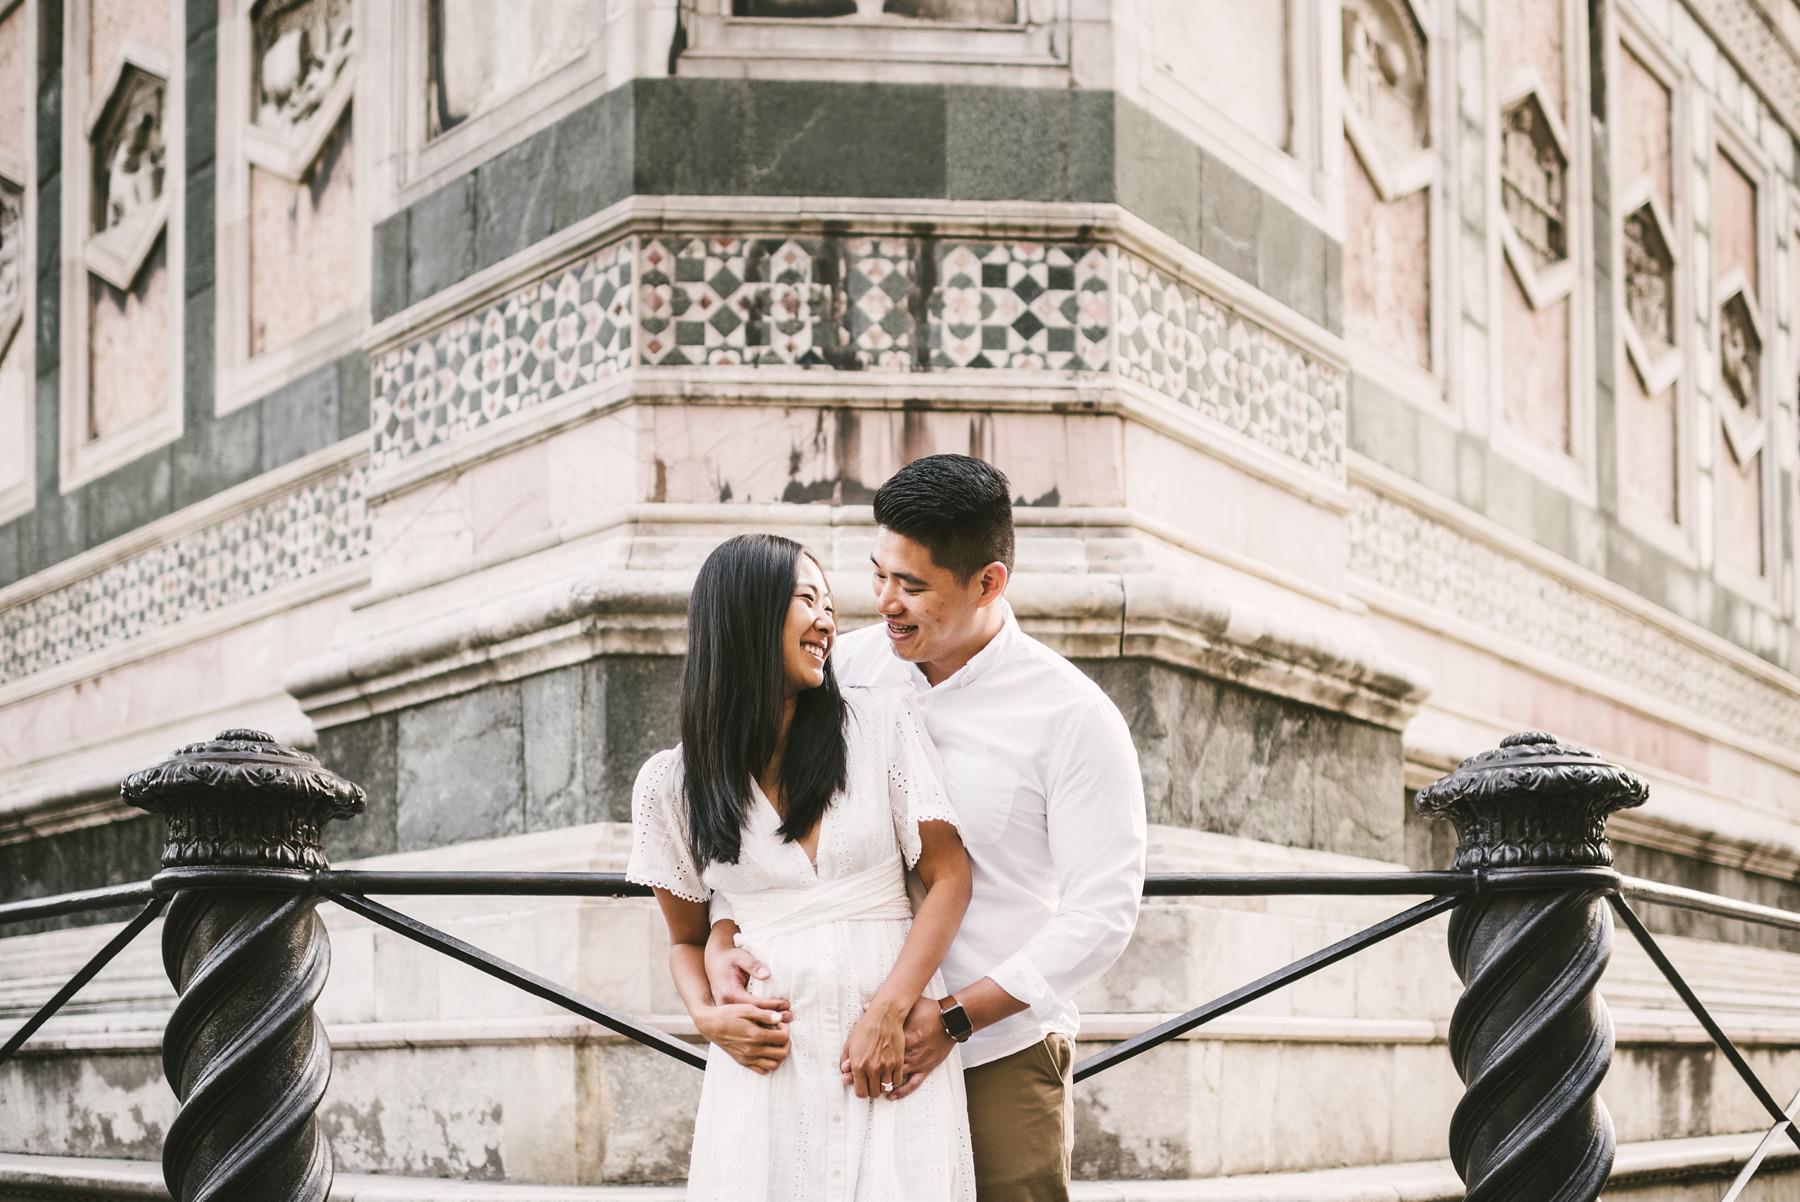 Wondering how you can make your wedding invitations unique? ItÕs easily said: with an engagement photo shoot at sunrise in an enchanting city like Florence! Read the article for inspiration